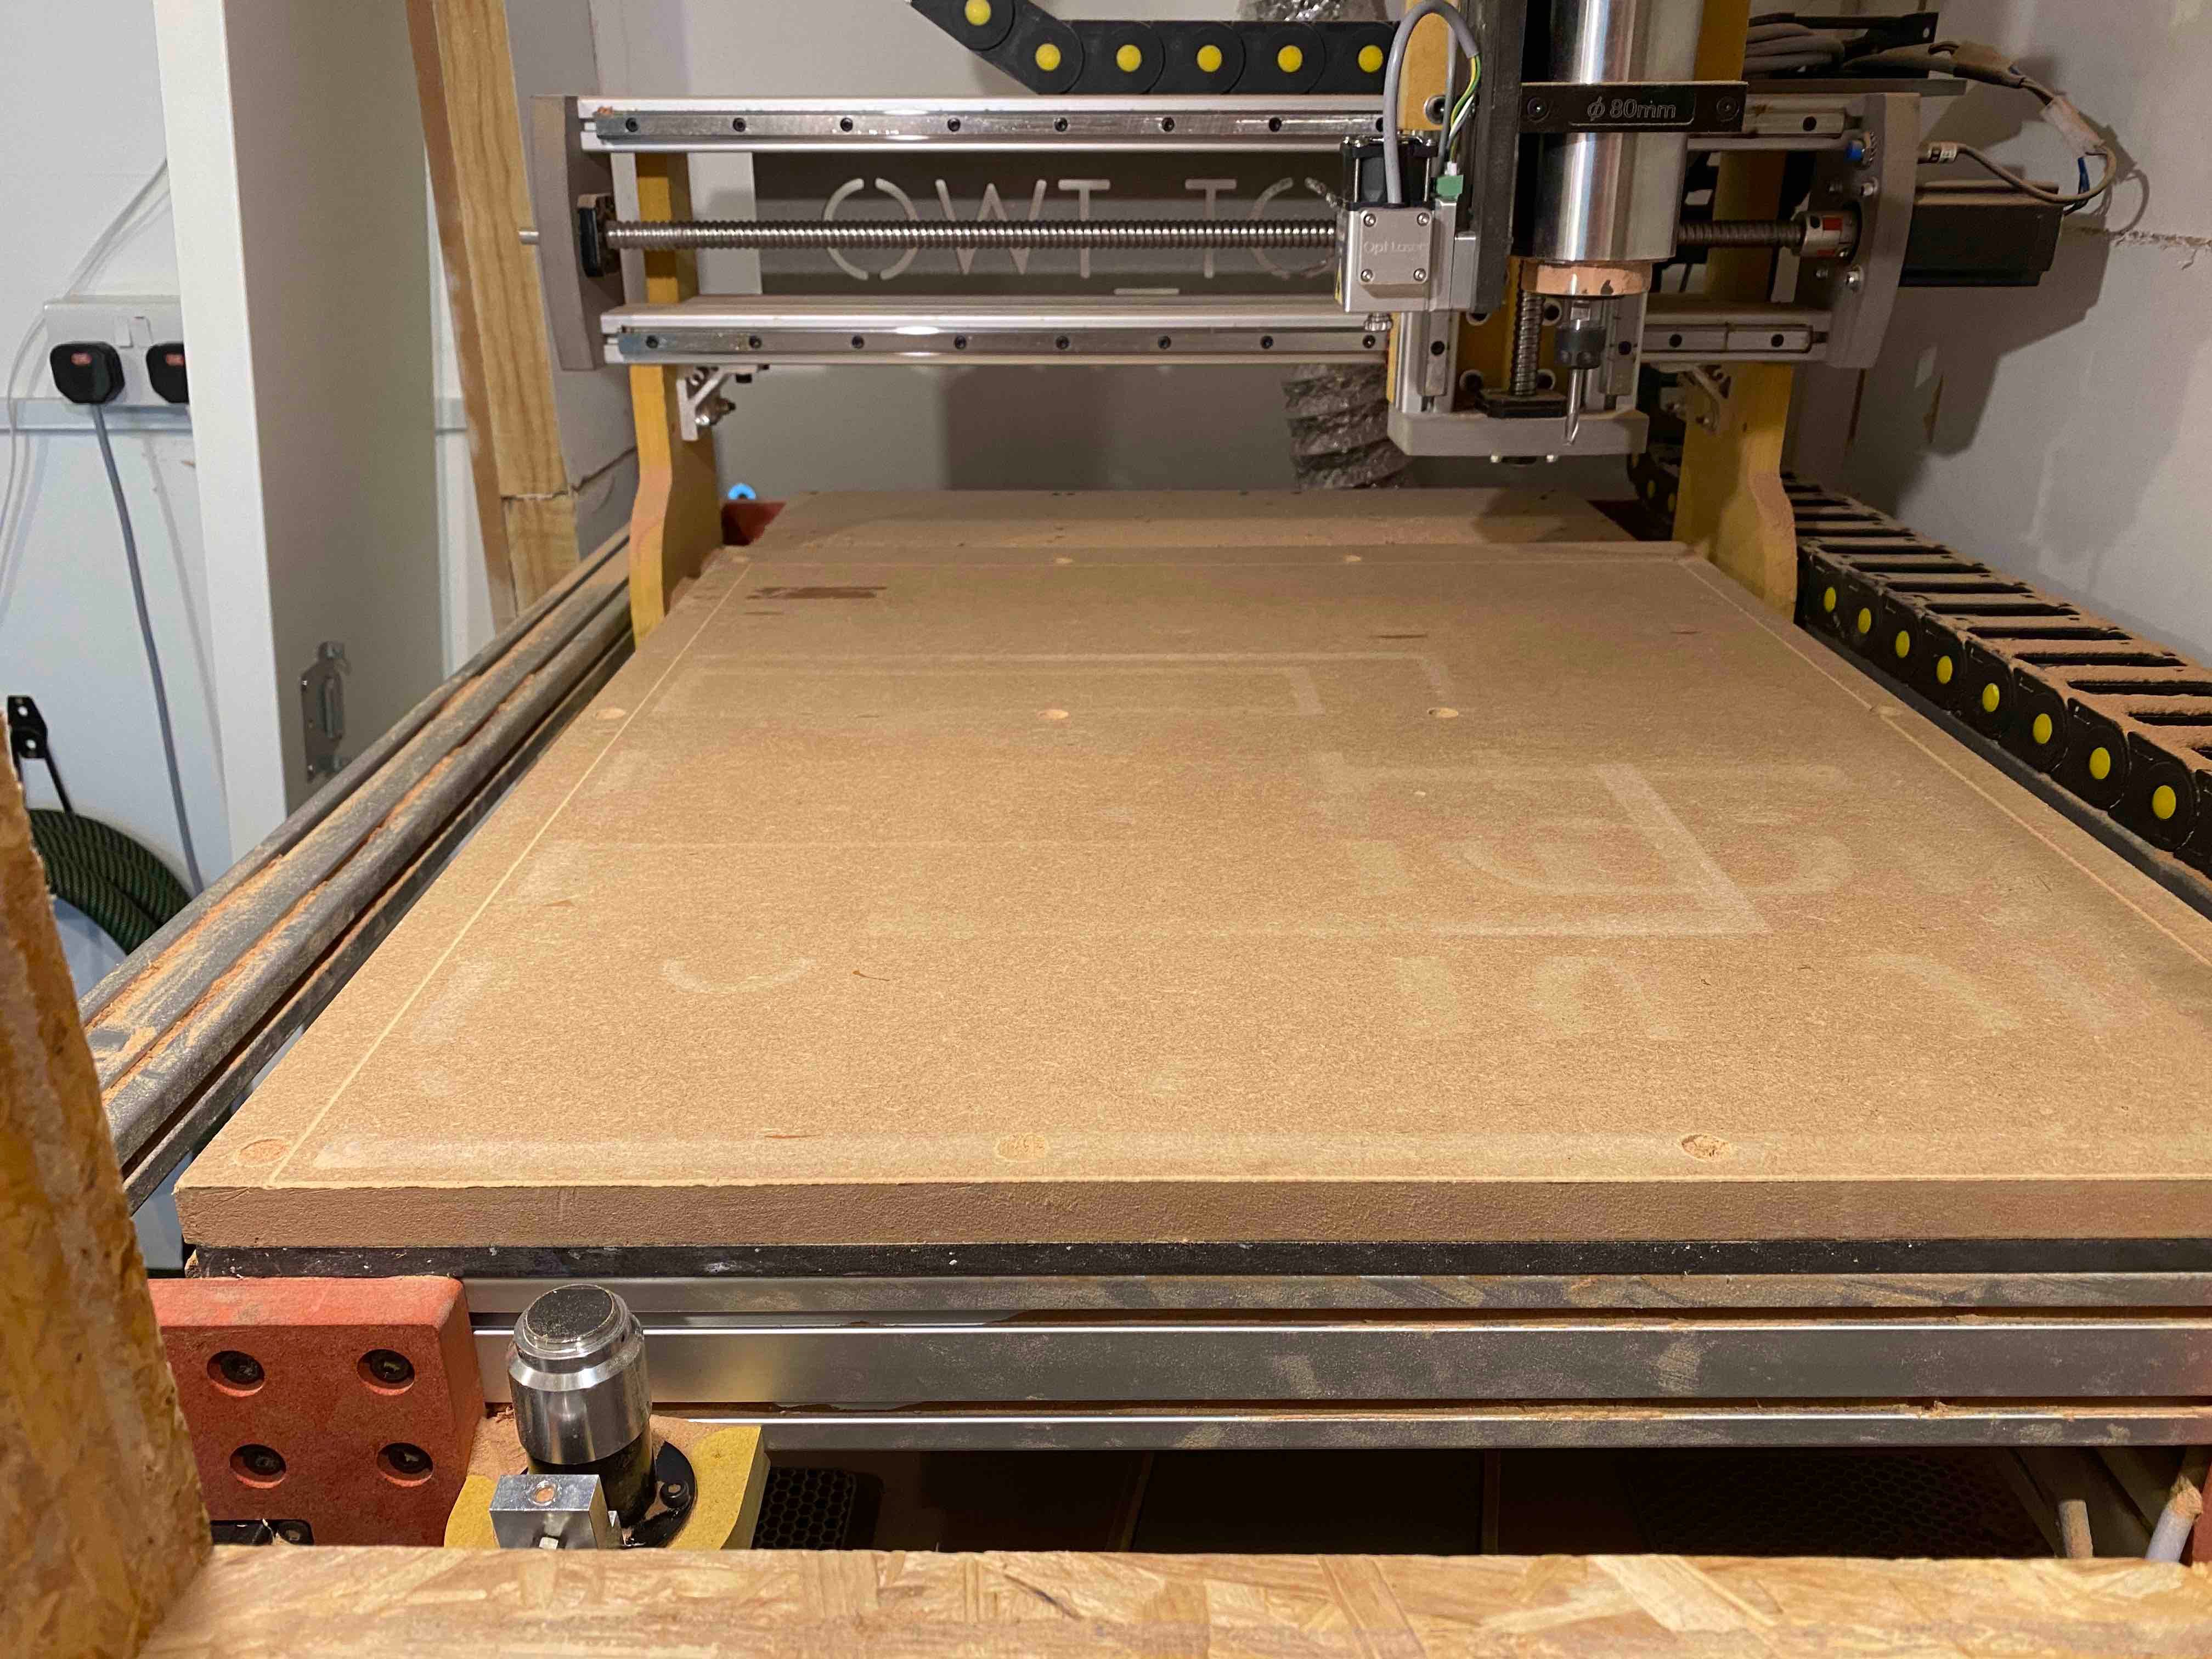 Changes in Fusion 360: Problem with generating paths for CNC